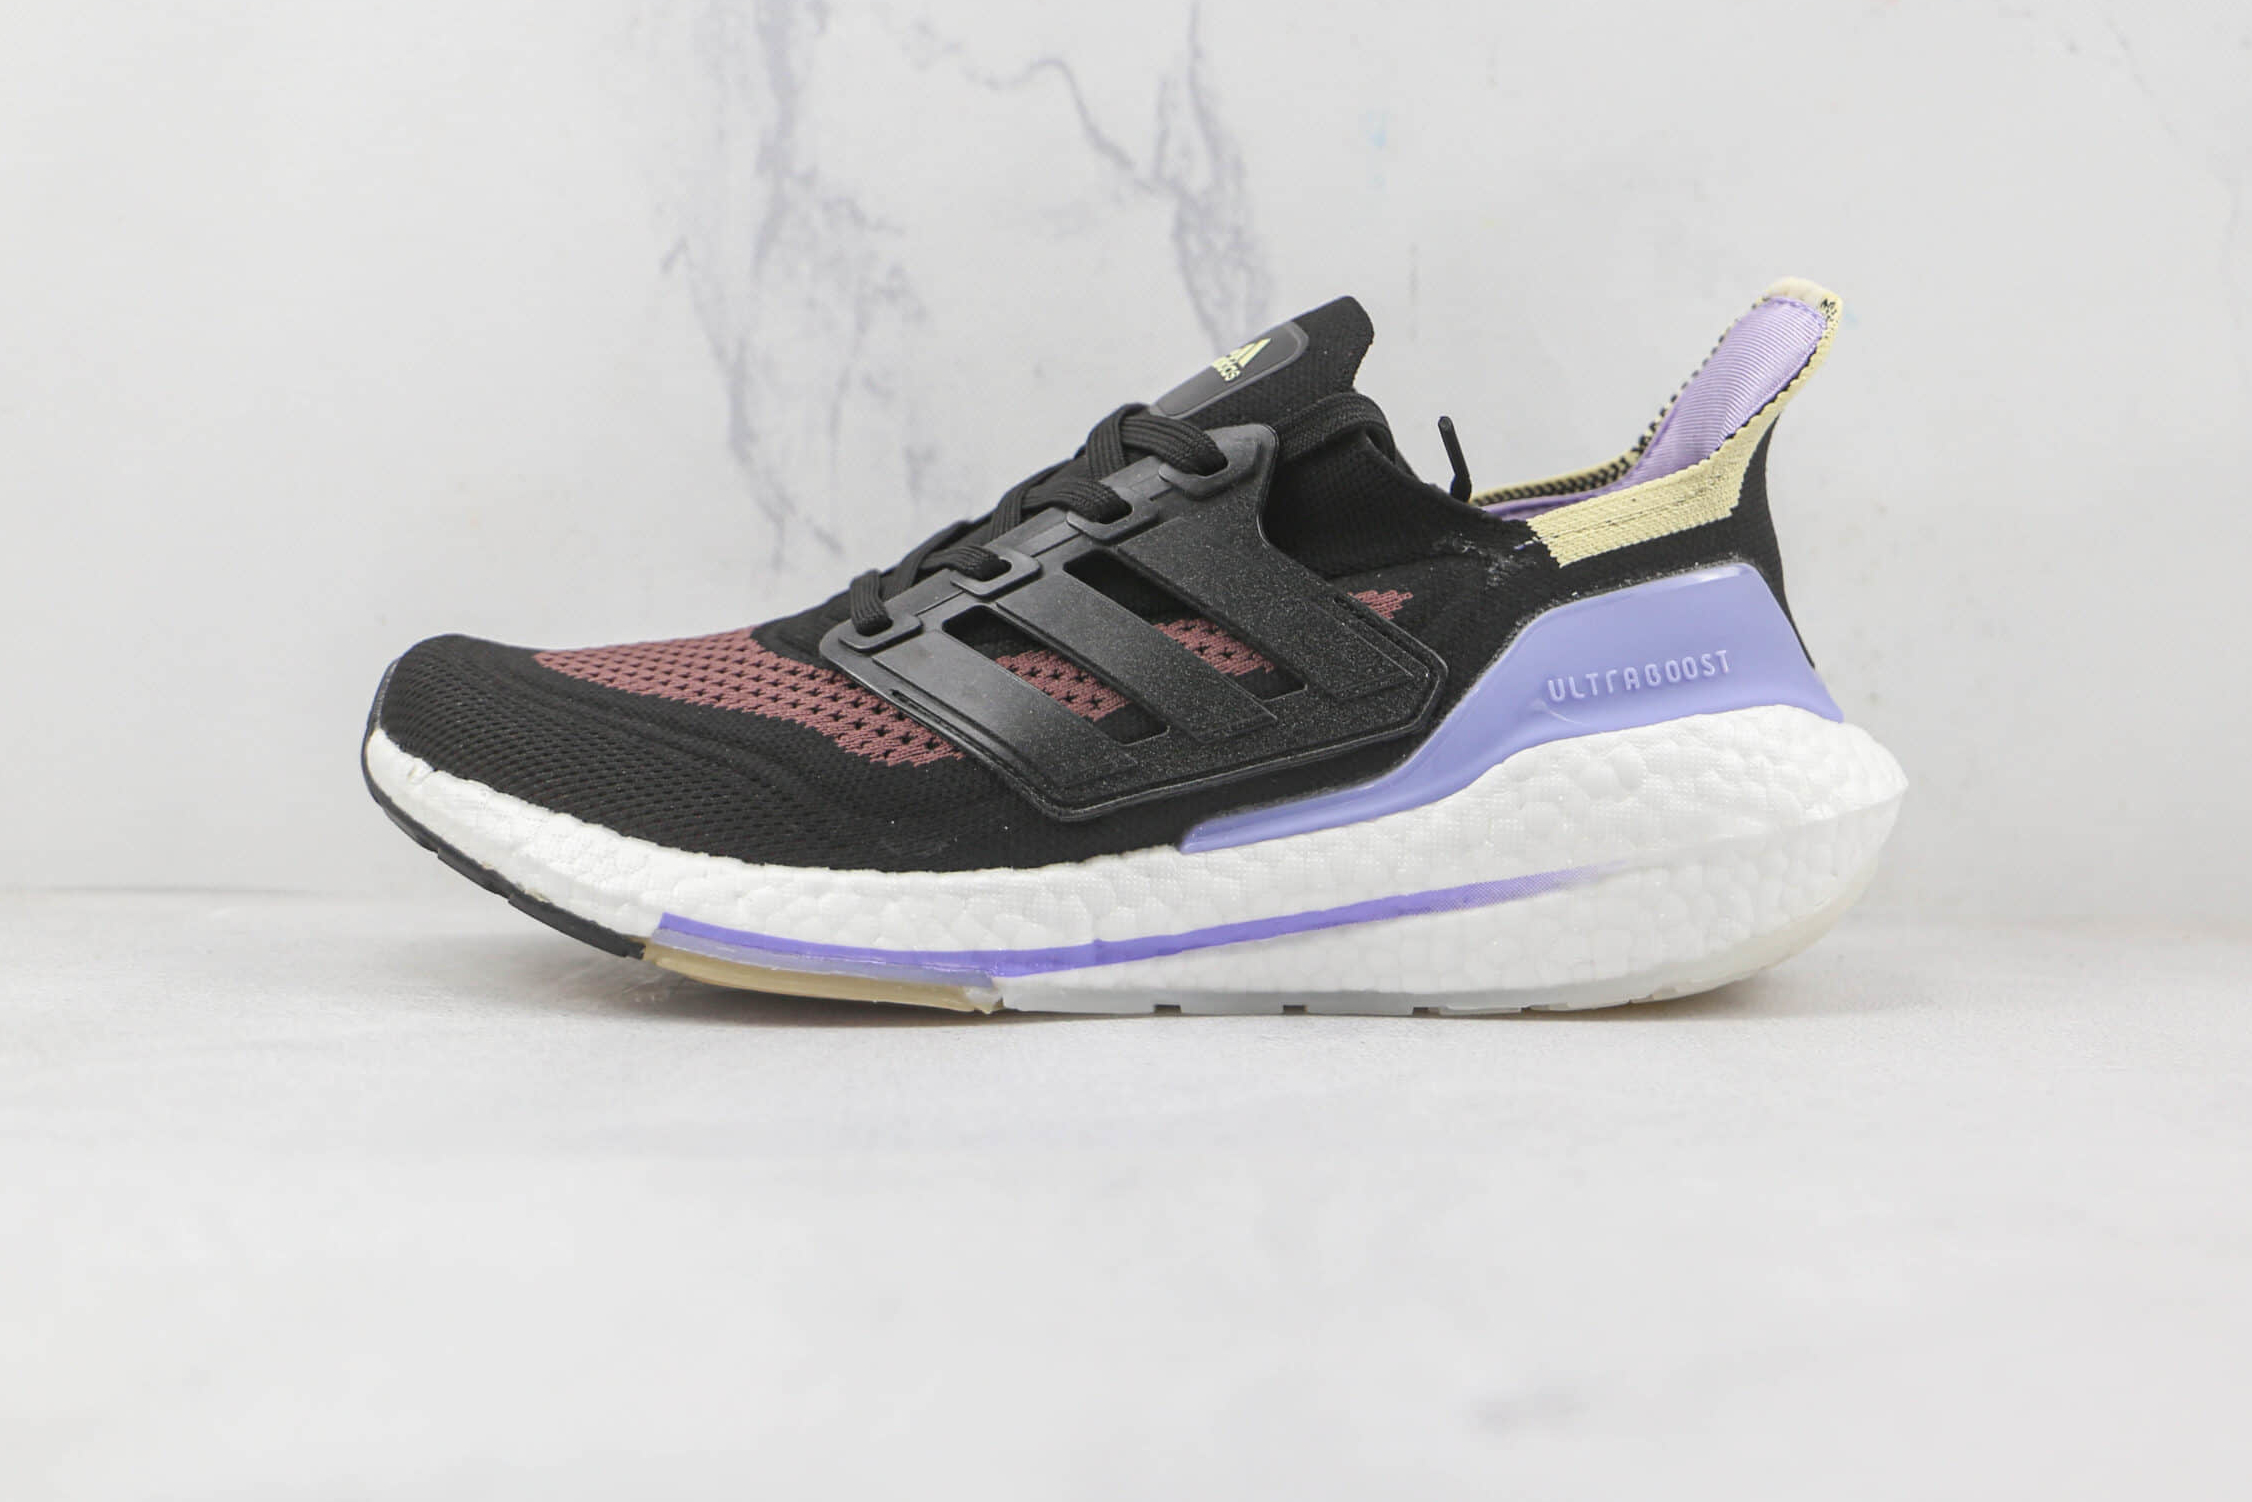 Adidas UltraBoost 21 Black Violet Tone S23841 - Latest Release and Stylish Performance Footwear